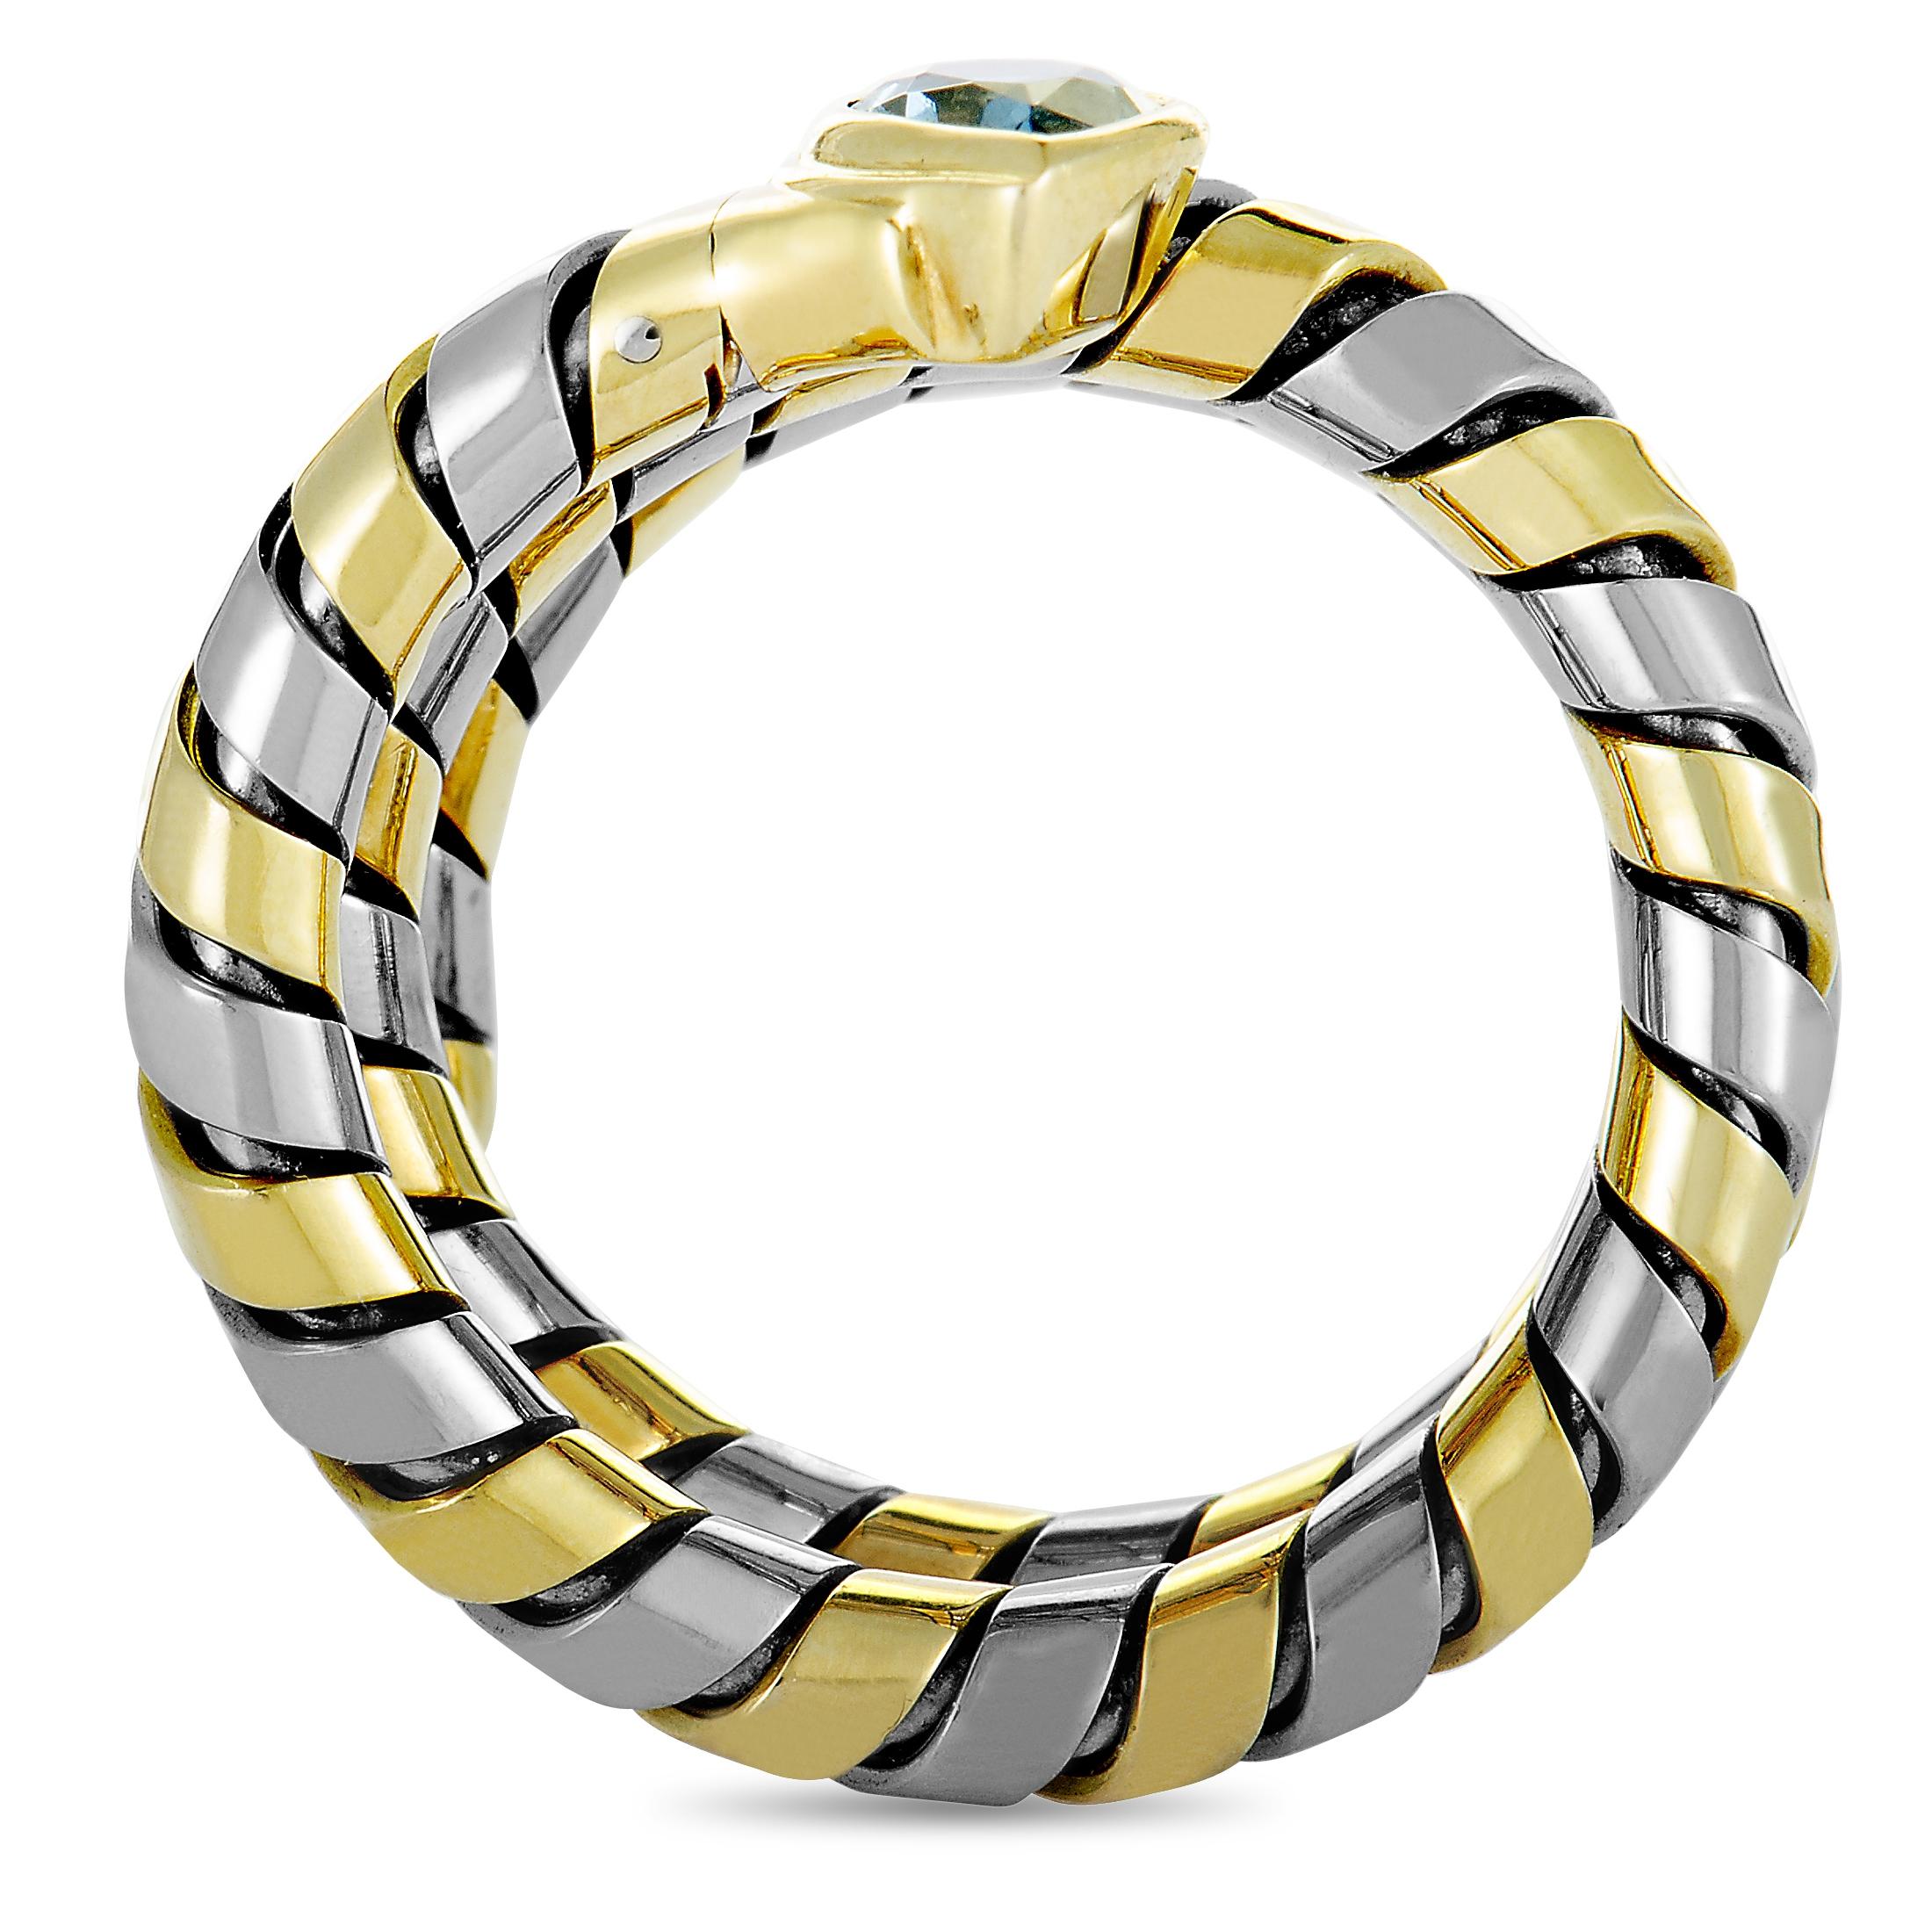 The Bvlgari “Serpenti” ring is made of 18K yellow gold and stainless steel and set with a topaz. The ring weighs 10.7 grams, boasting band thickness of 10 mm and top height of 4 mm, while top dimensions measure 7 by 8 mm.

This item is offered in